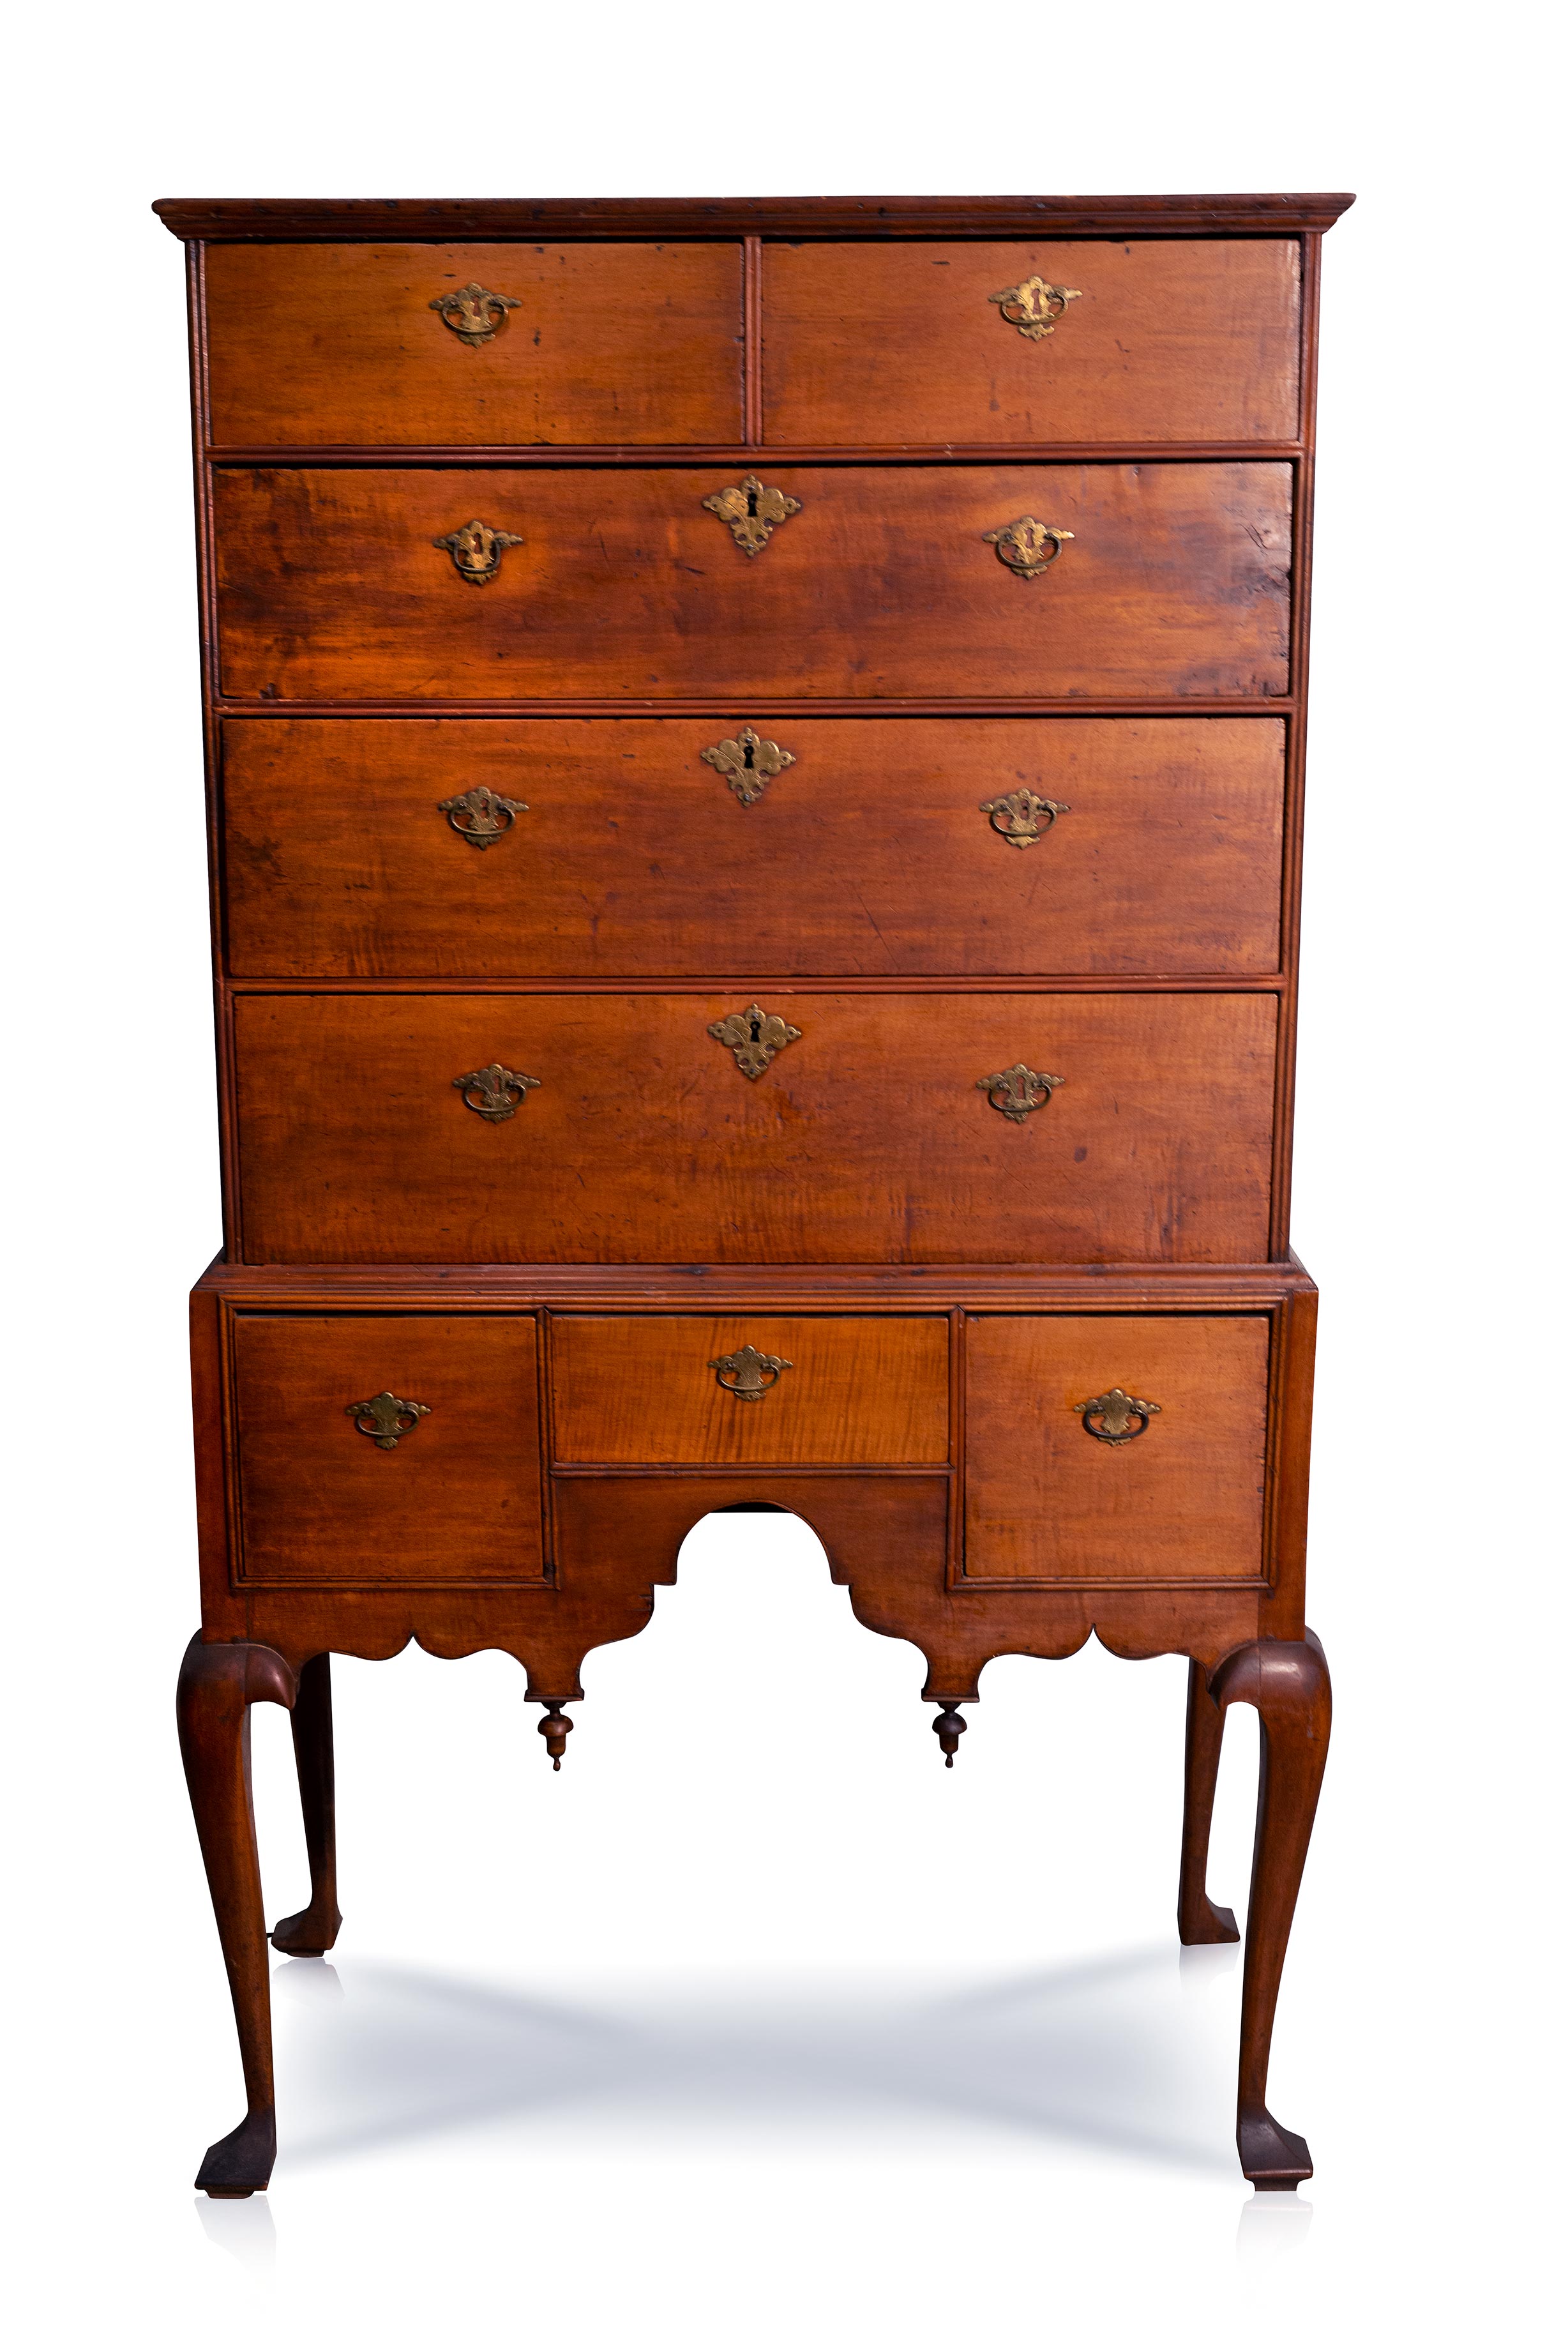 An early transitional William and Mary/ Queen Anne high chest